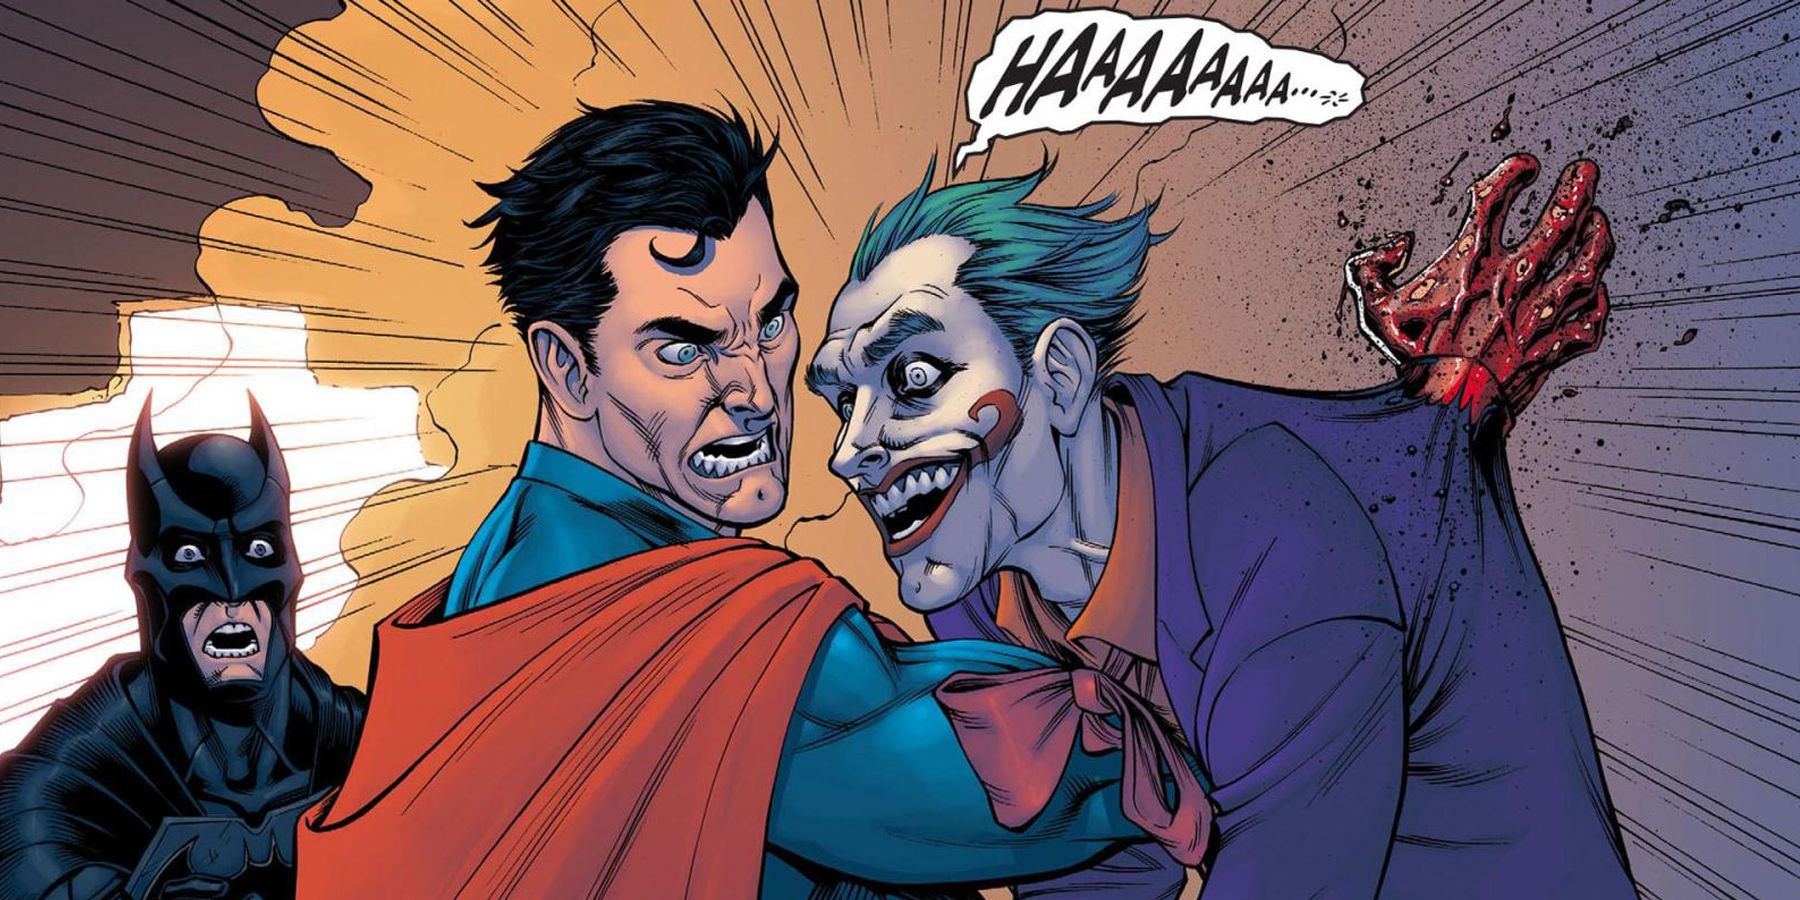 Superman punches his hand through the Joker's chest